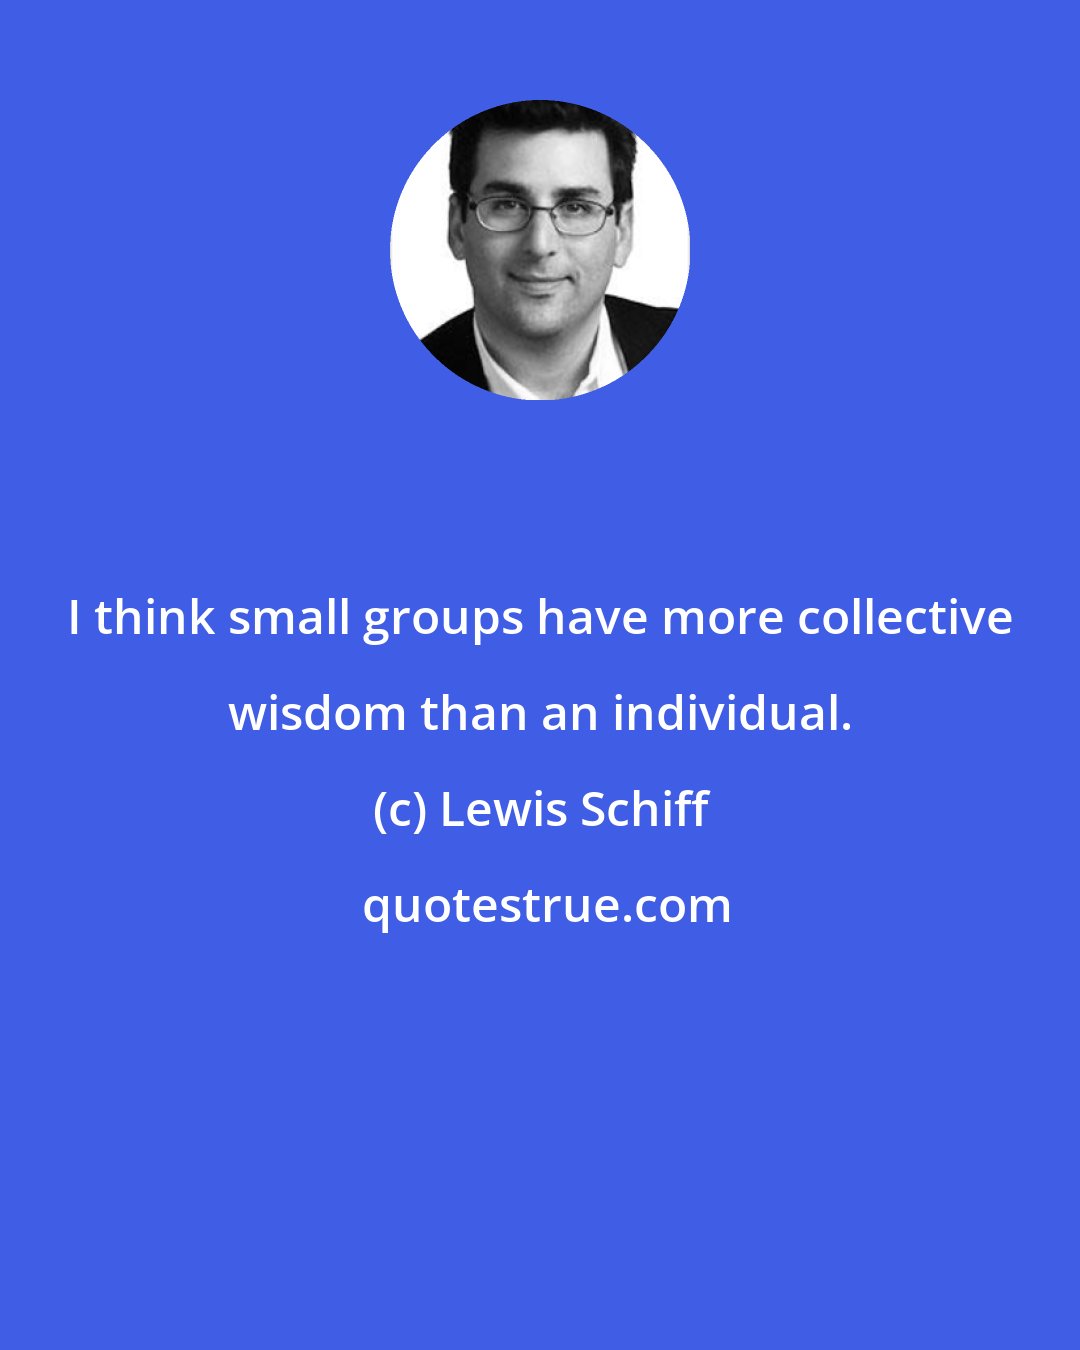 Lewis Schiff: I think small groups have more collective wisdom than an individual.